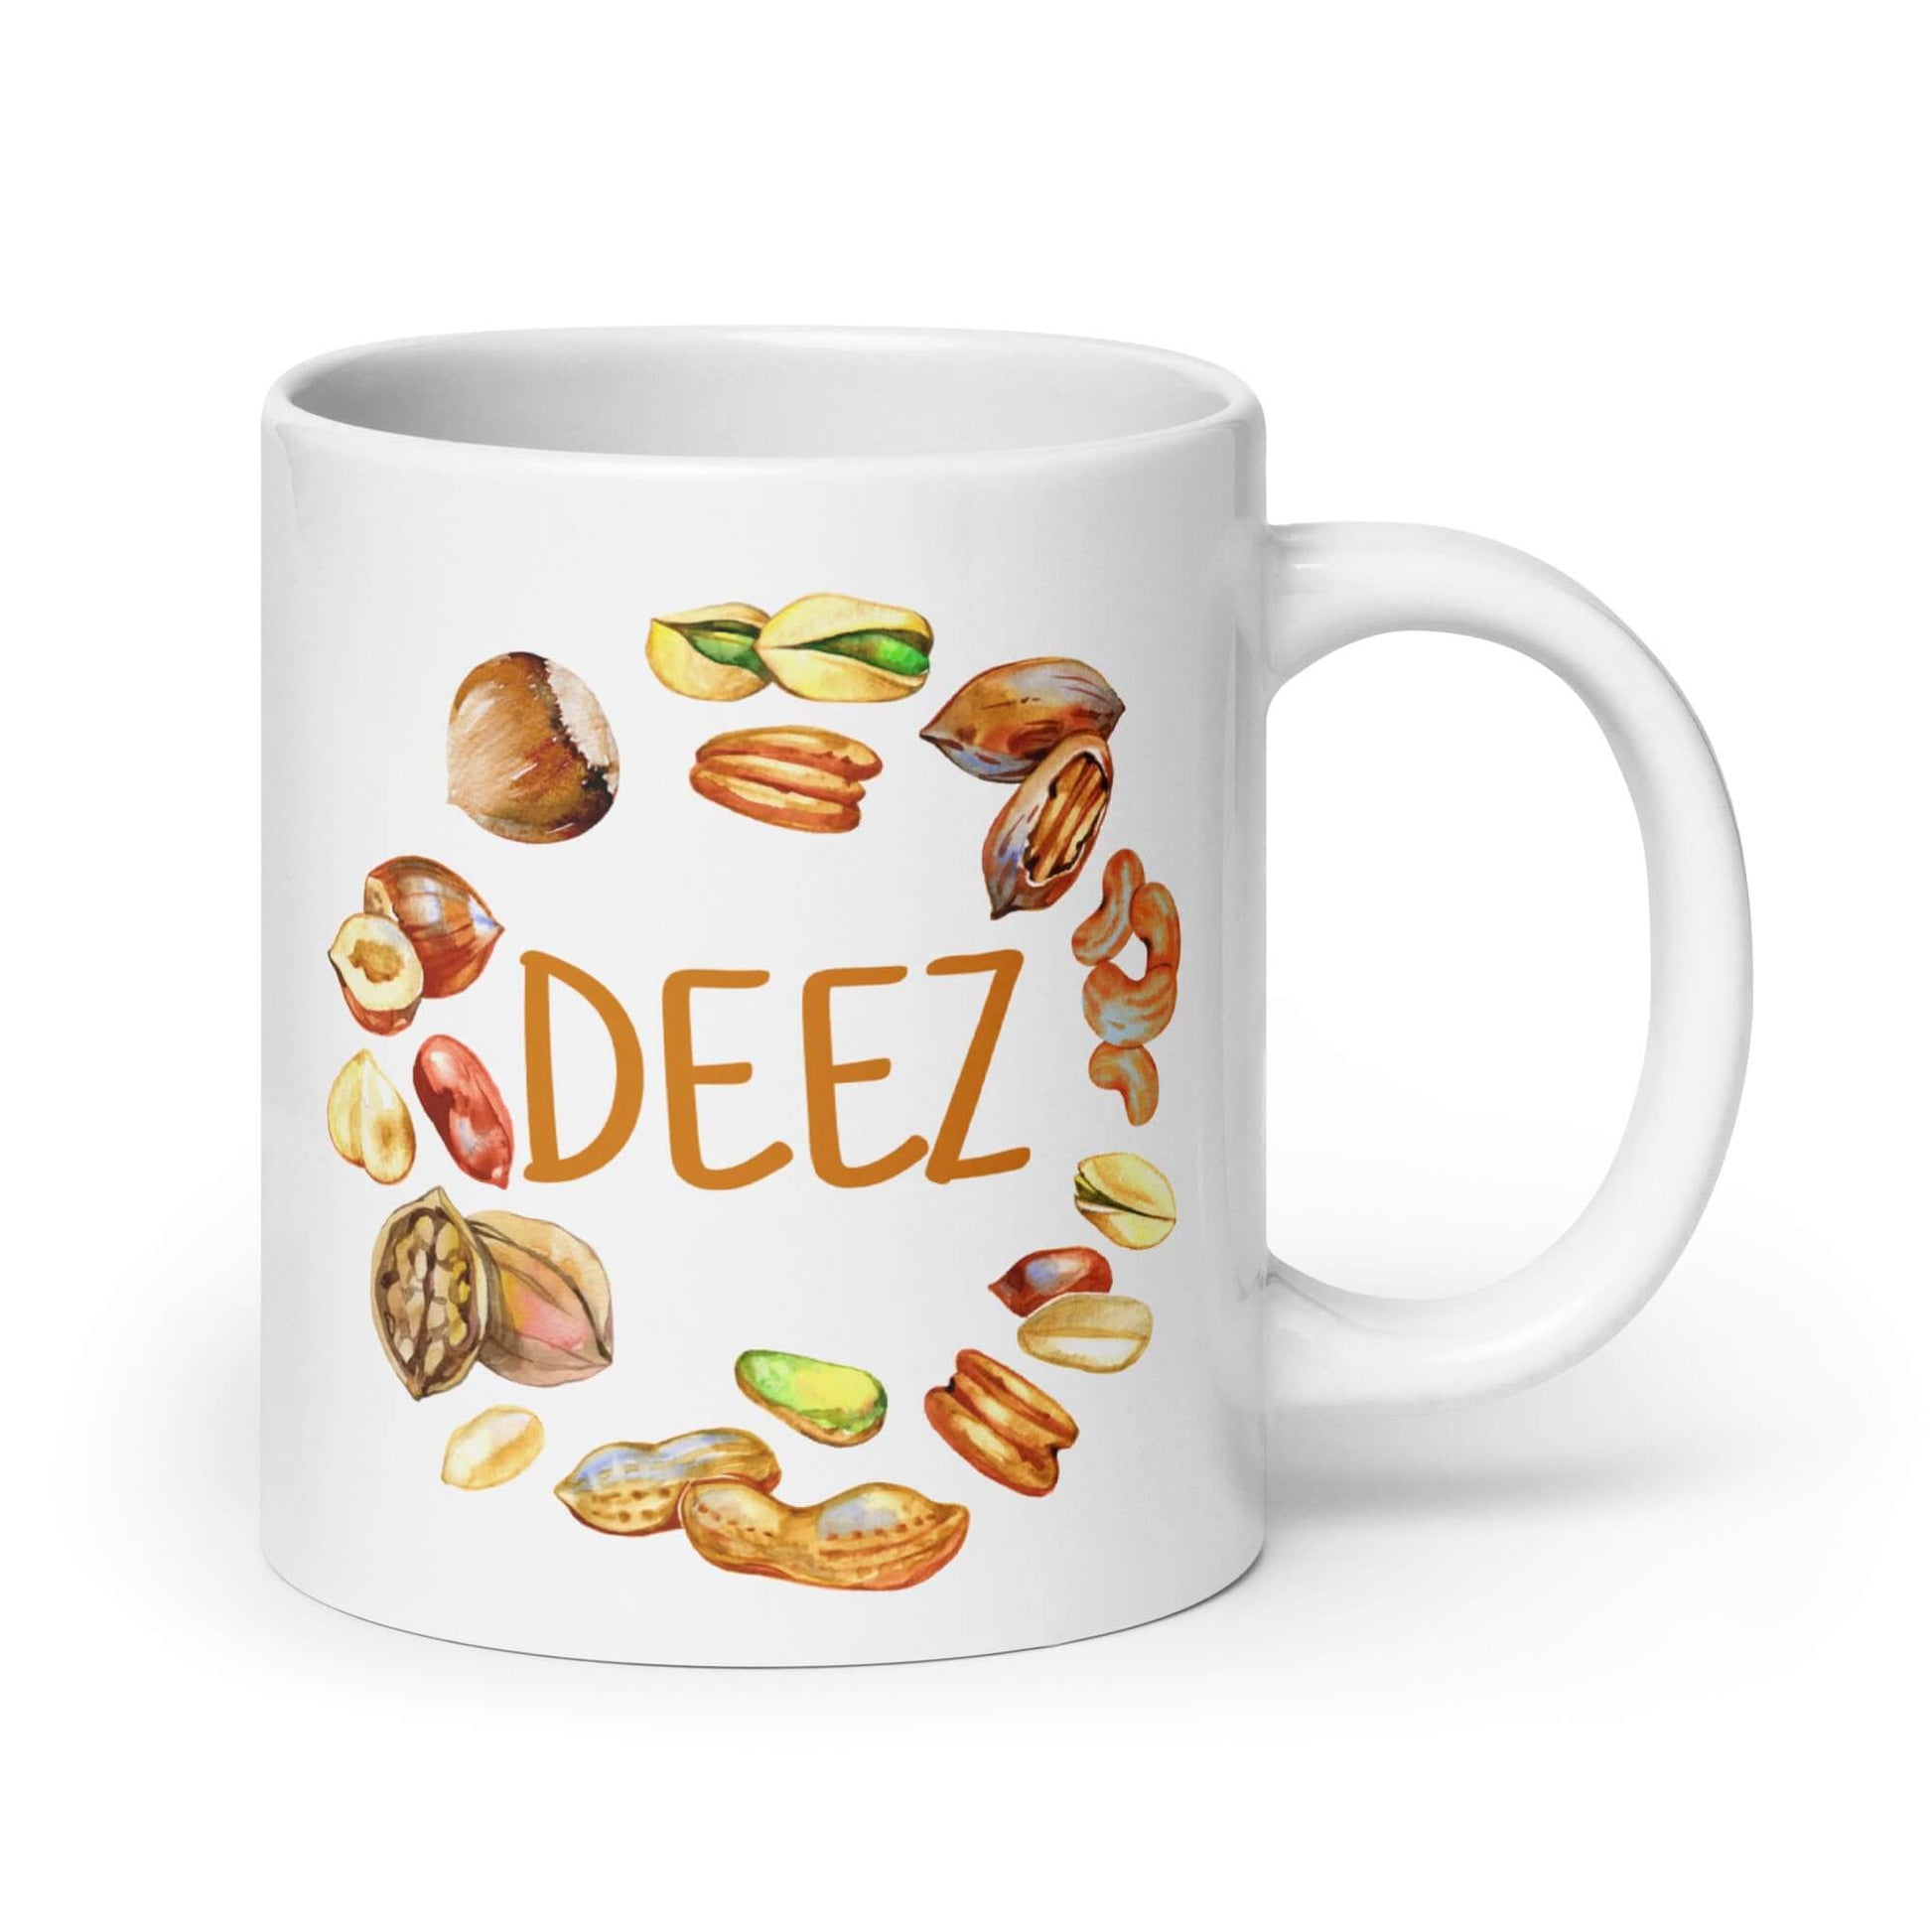 White ceramic mug with an image of various nuts and the word Deez. The graphic is printed on both sides of the mug.